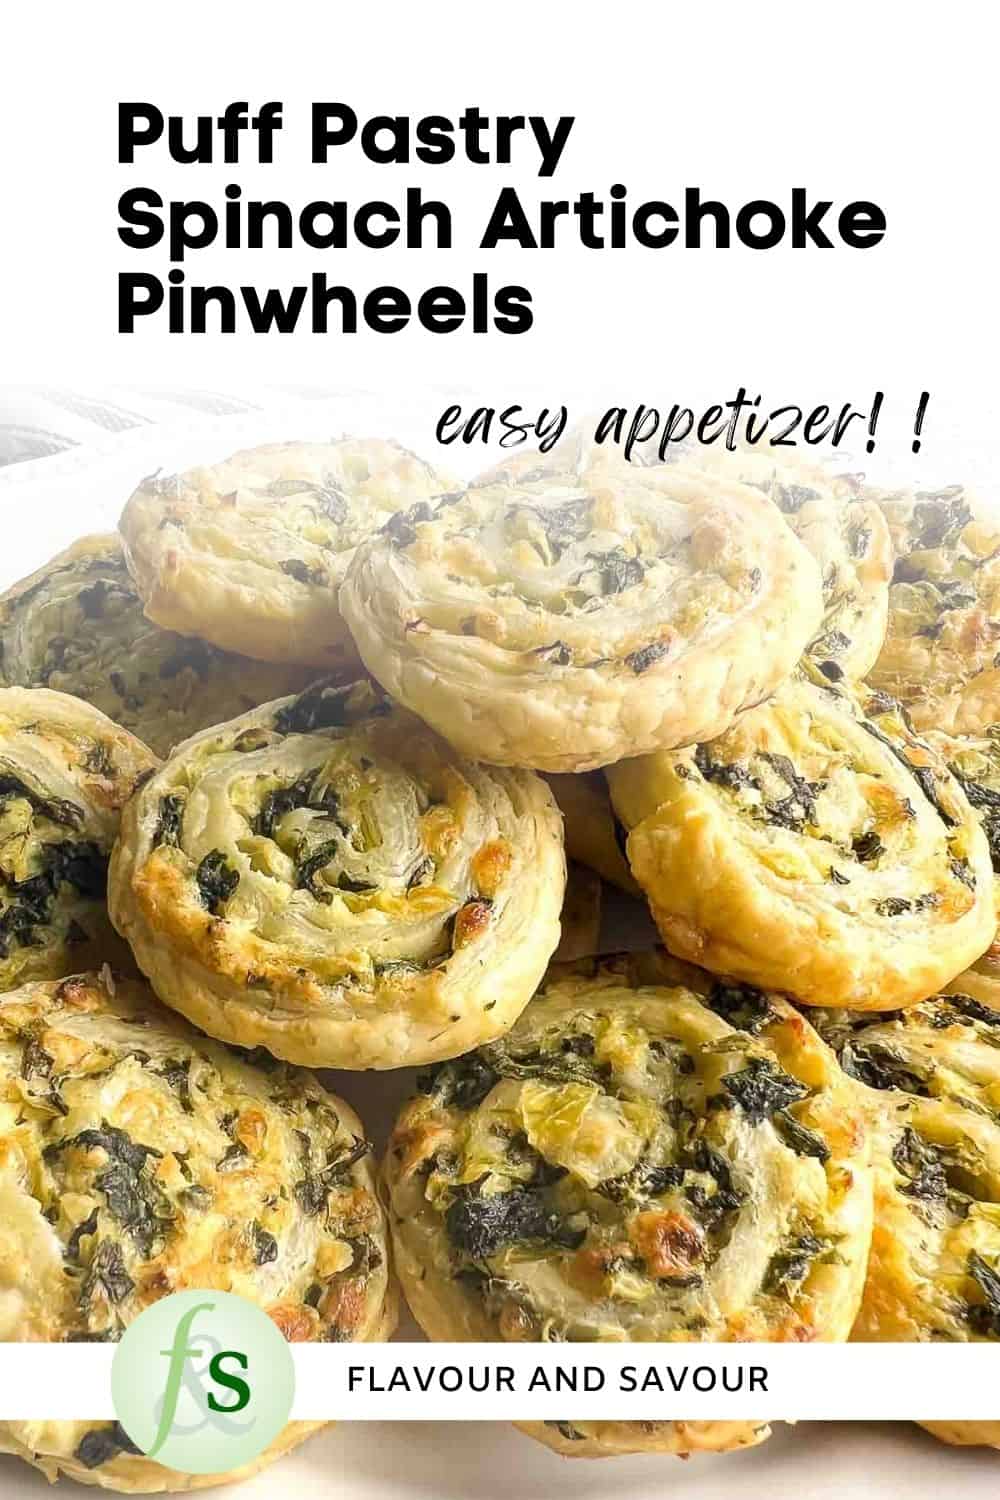 Puff Pastry Spinach Artichoke Pinwheels - Flavour and Savour